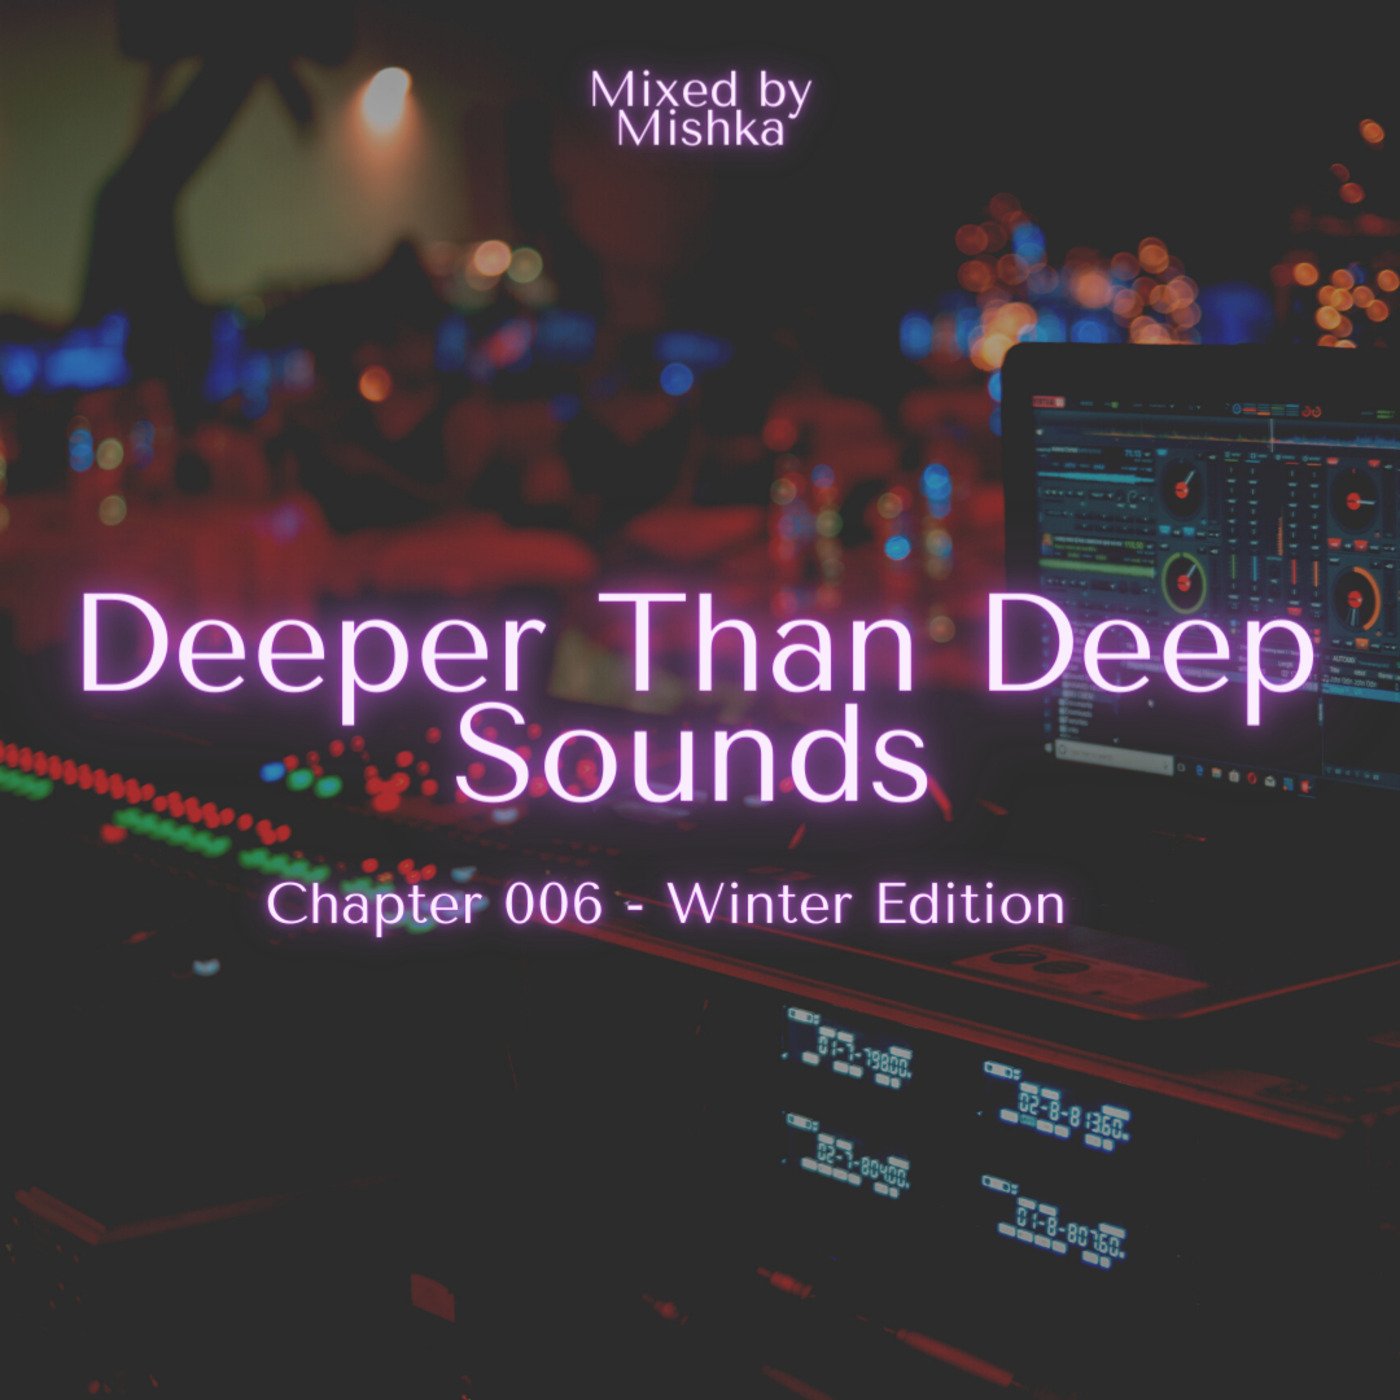 Deeper Than Deep Sounds - Chapter 002 Mixed by Mishka